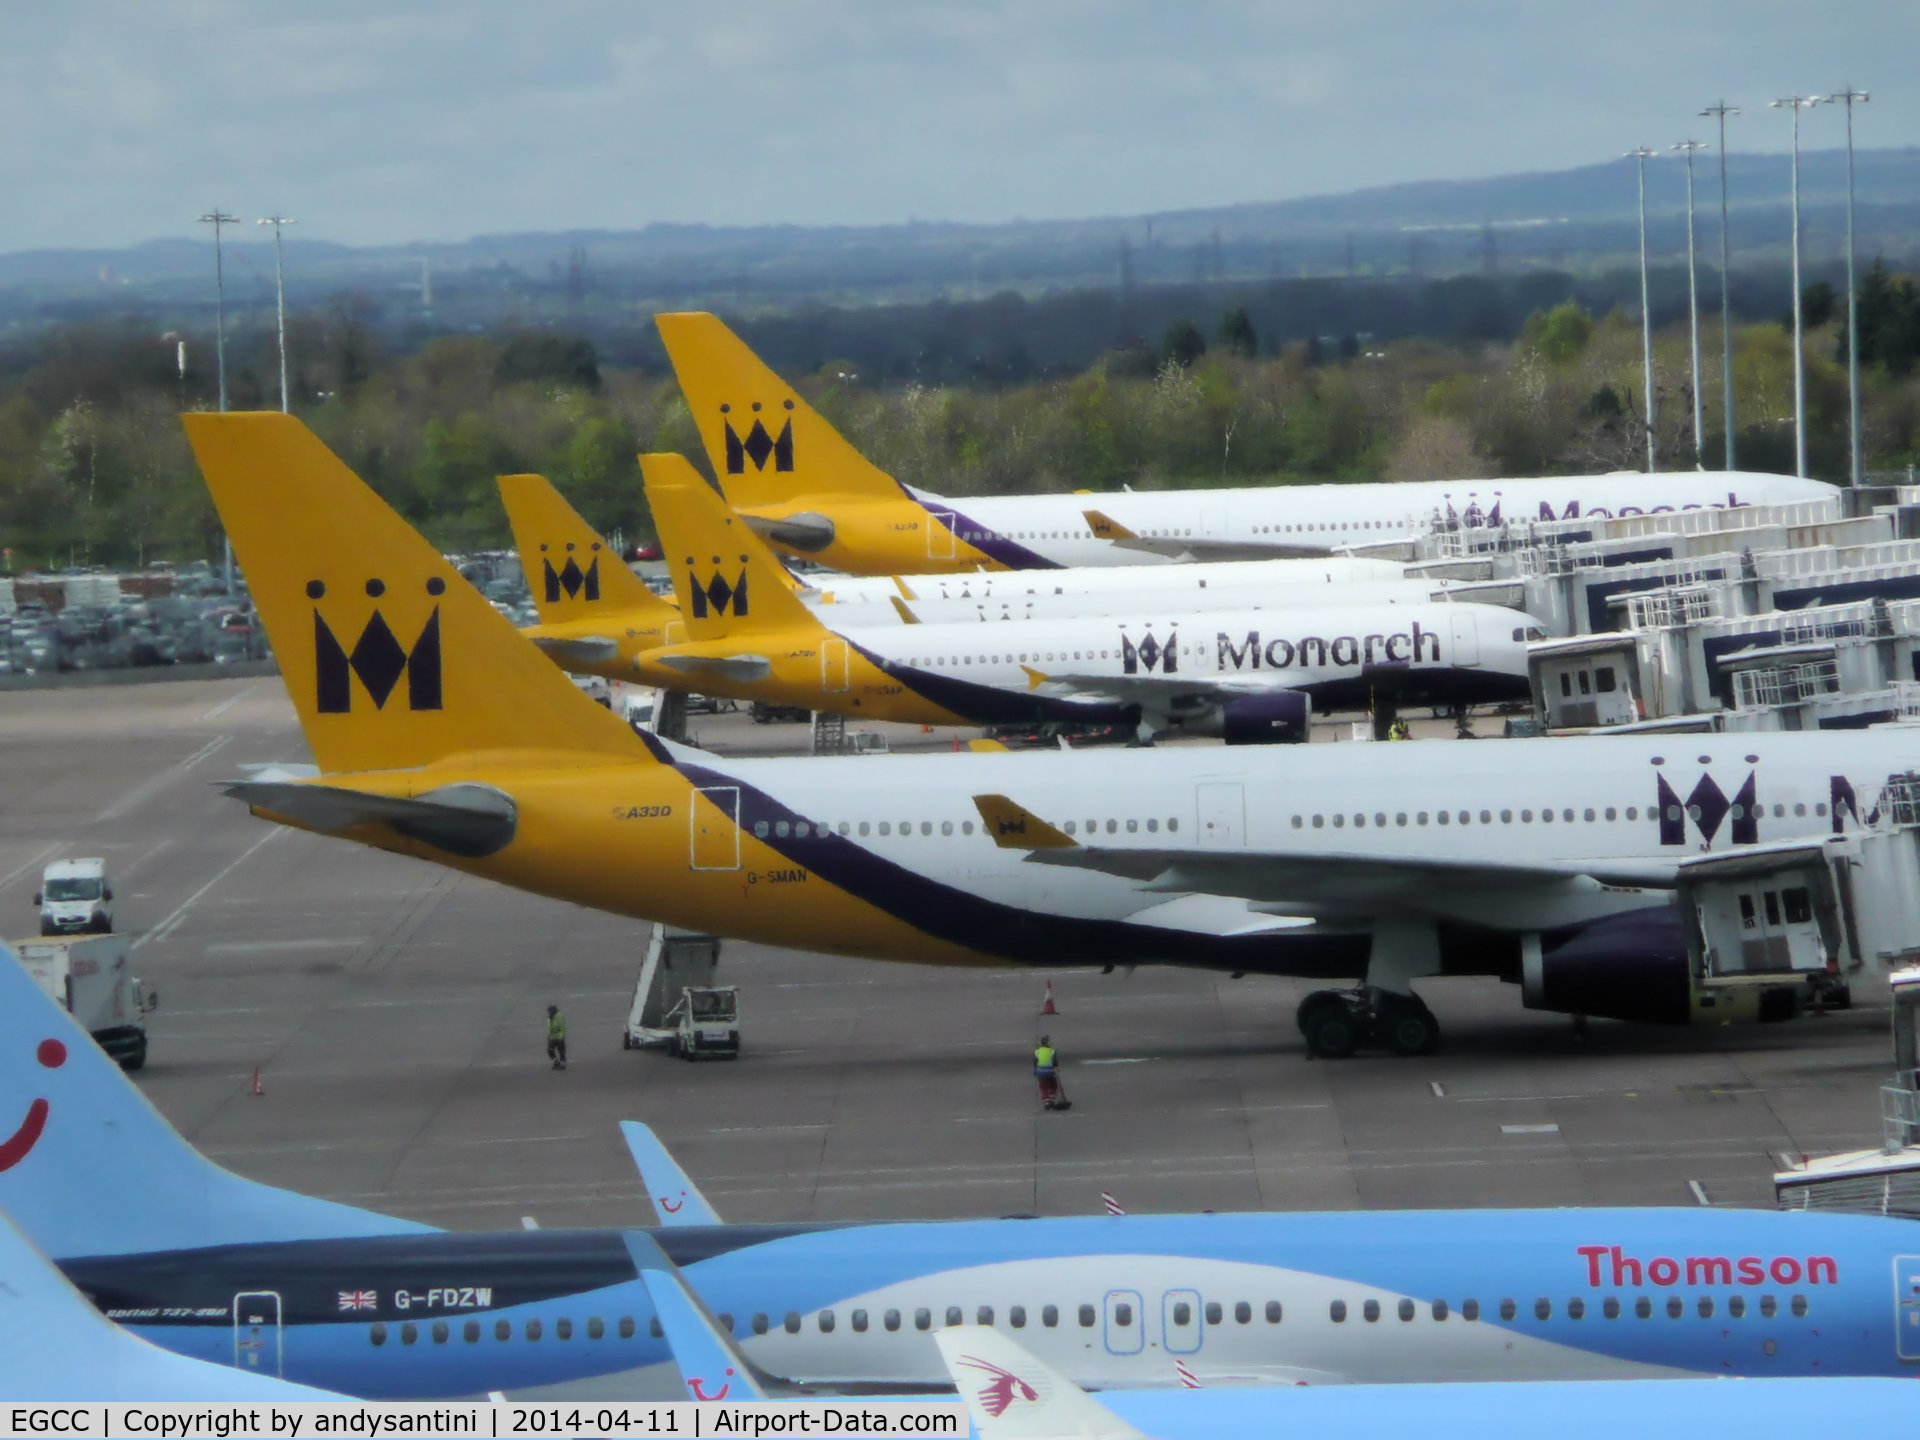 Manchester Airport, Manchester, England United Kingdom (EGCC) - MON/TOM aircraft on there stands/gates on T2 